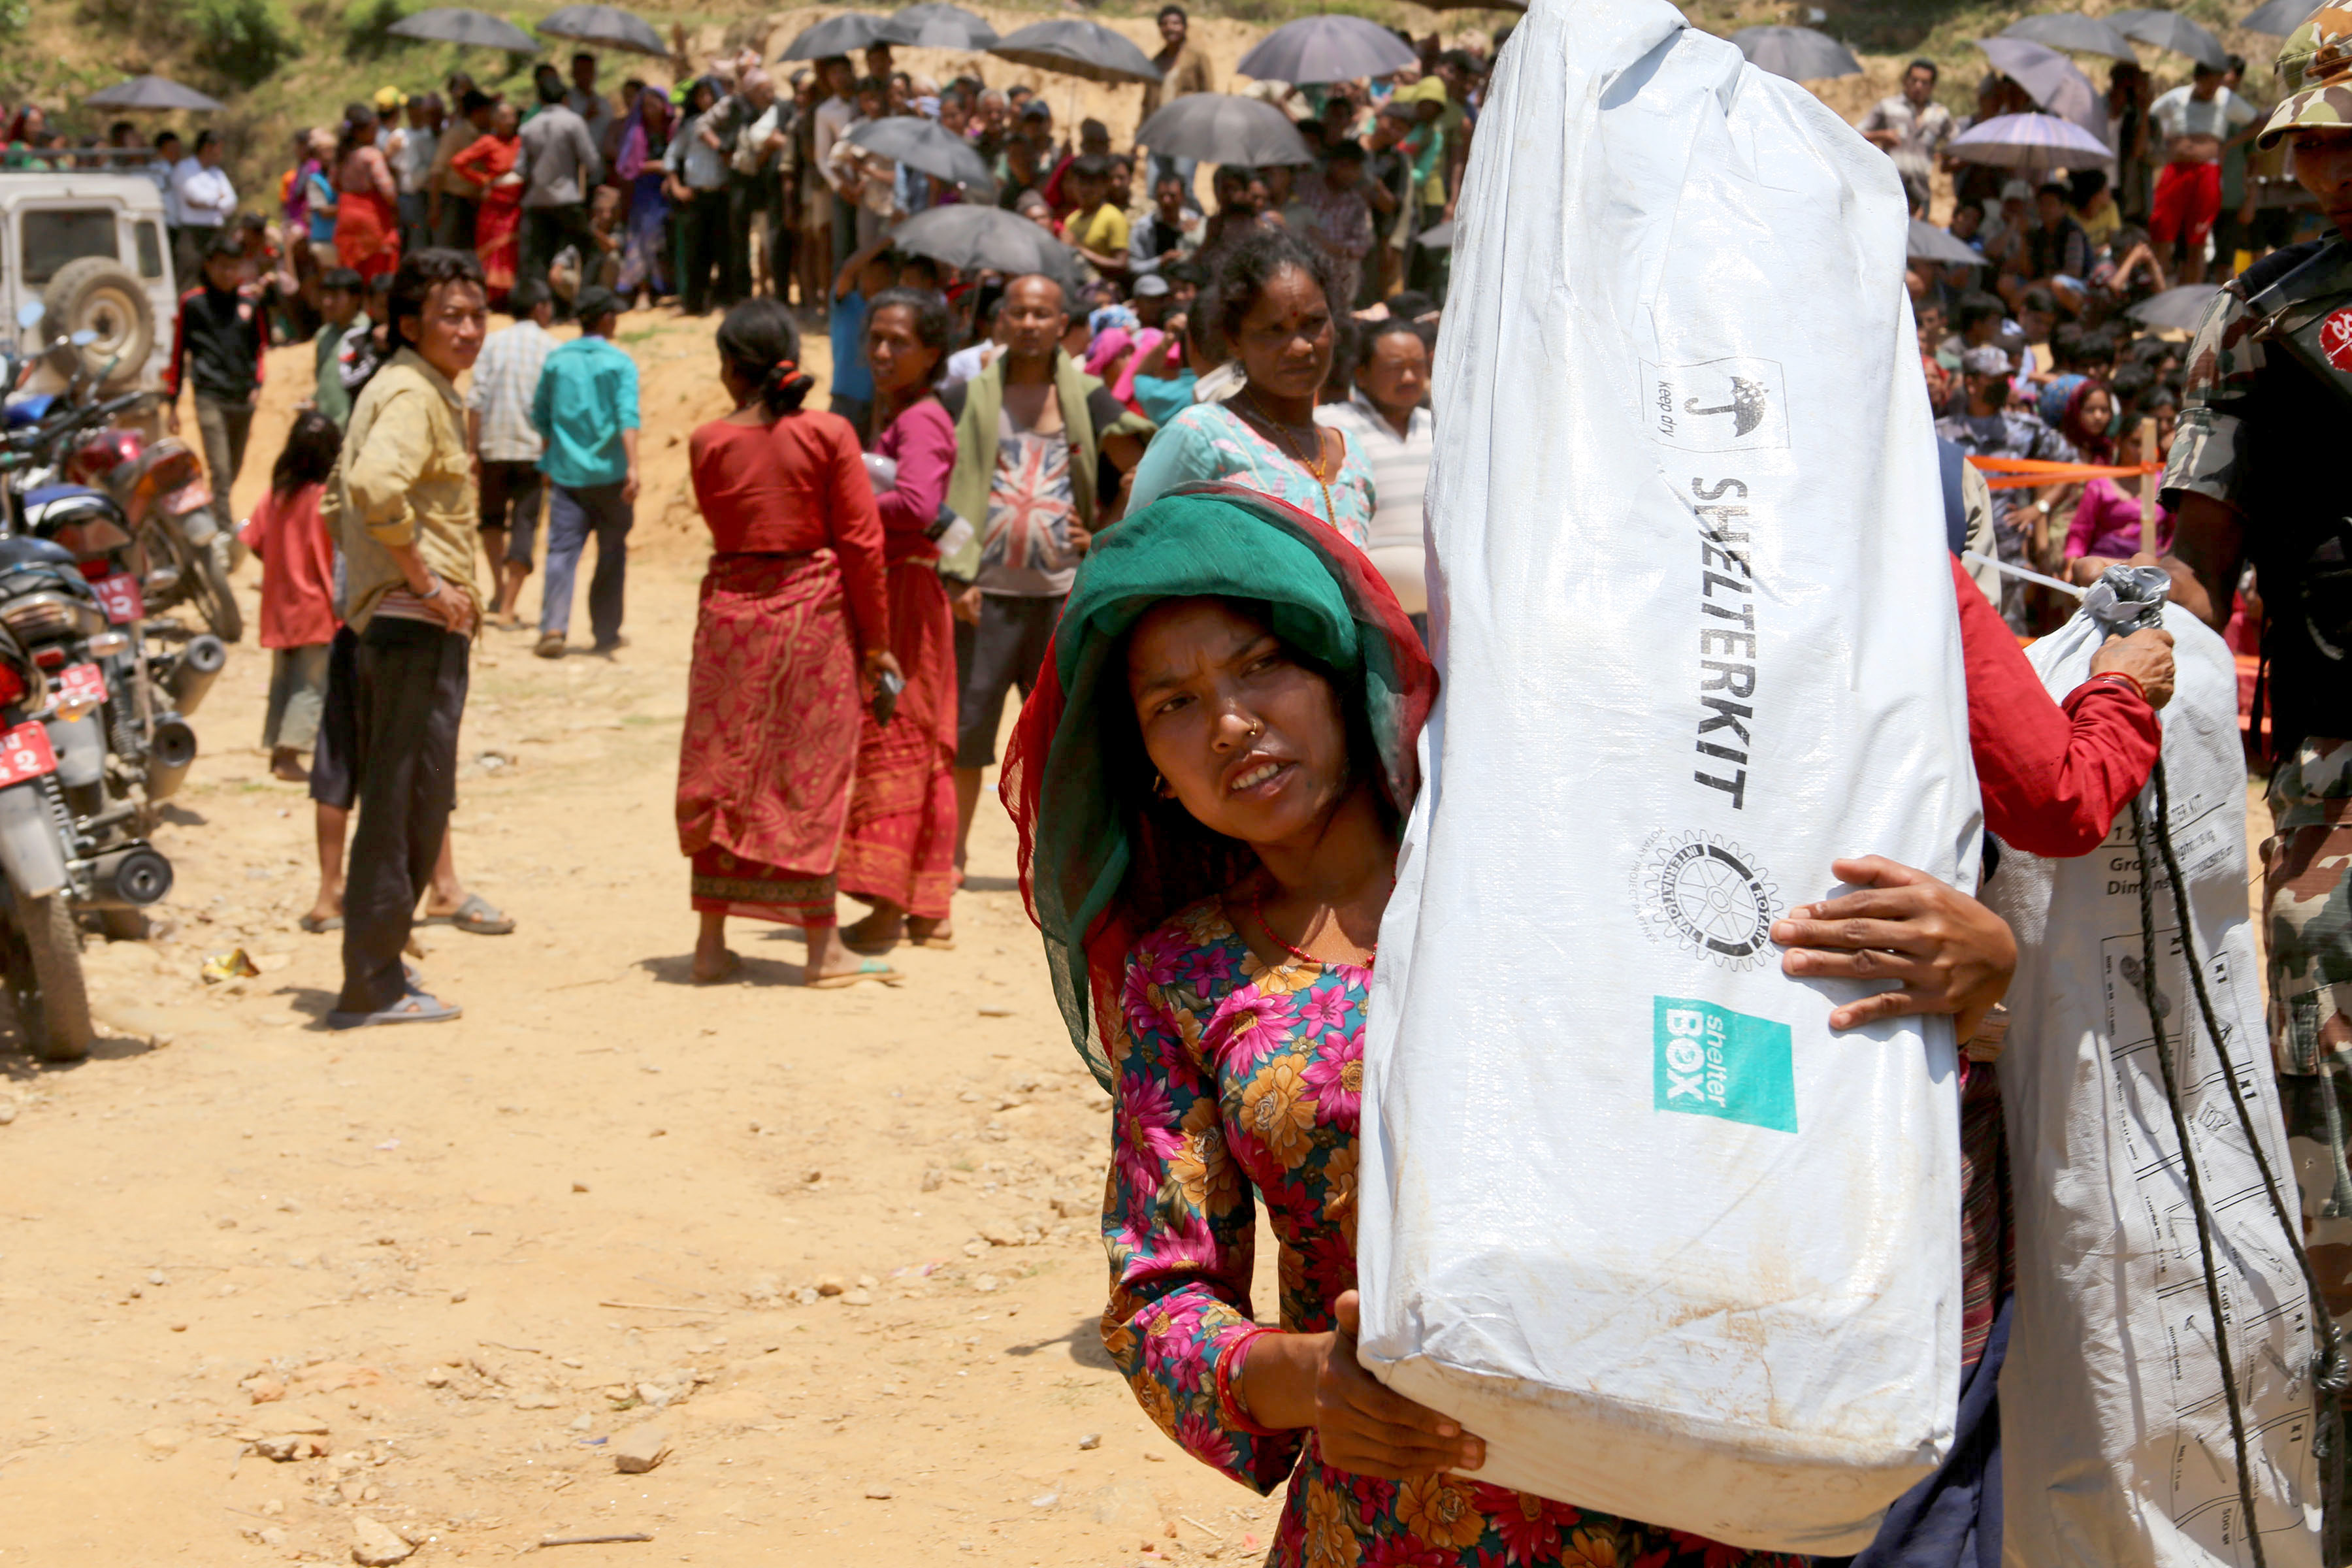 ShelterBox distributes emergency shelter and essential aid to families in Nepal, following the 2015 earthquake